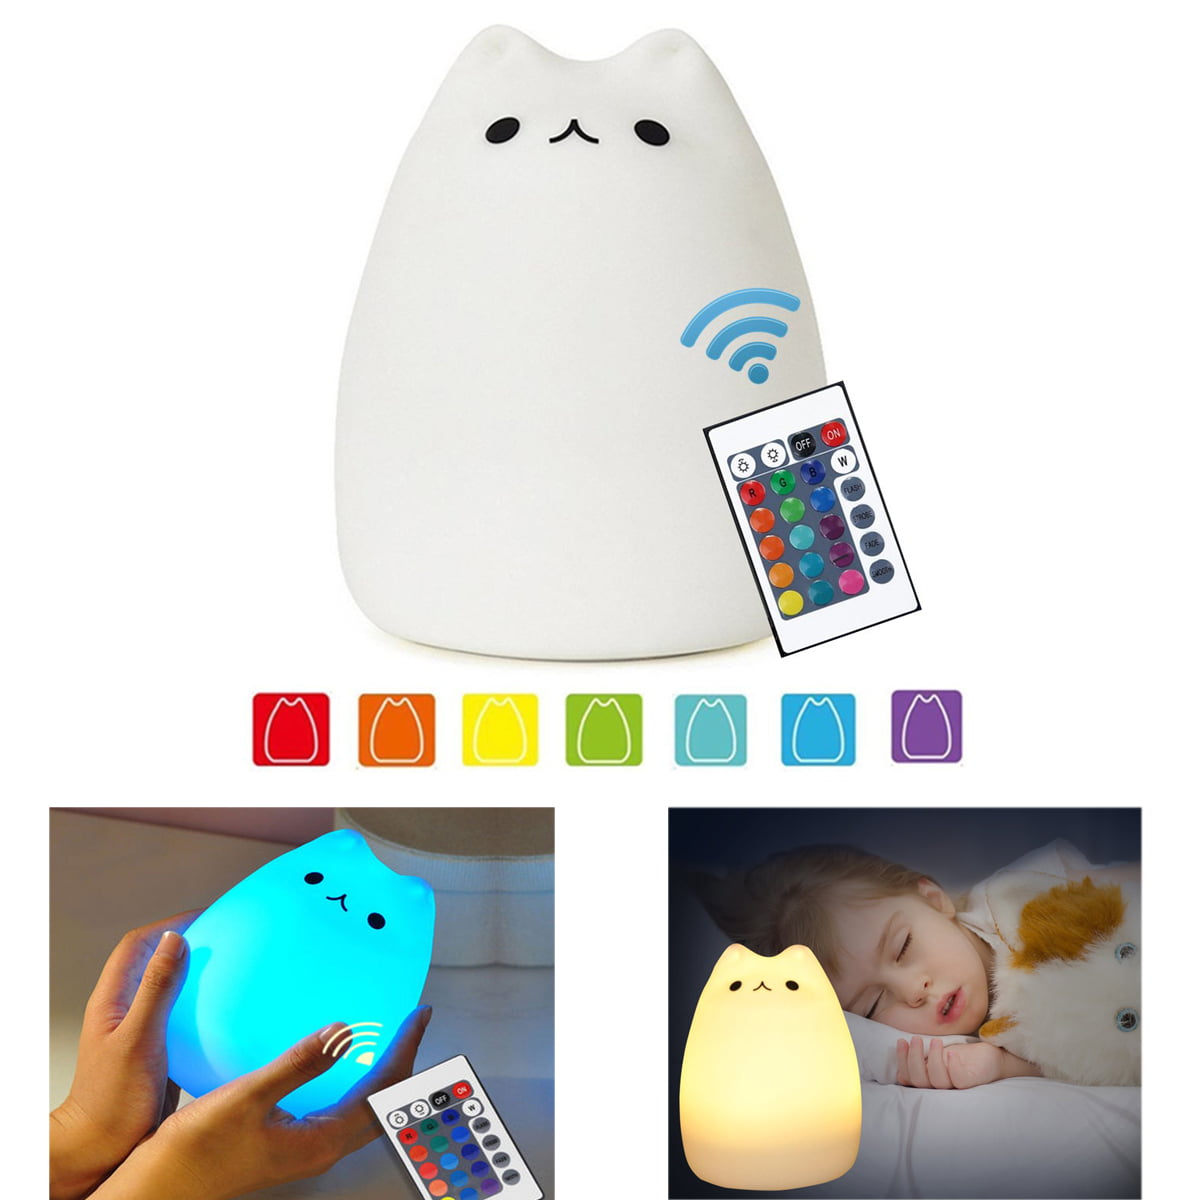 NeoJoy Cat Kids Night Light with Remote Control Baby Nursery Night Light Silicone Kitty Beside Lamp Christmas Gift Ideas for Toddler Children